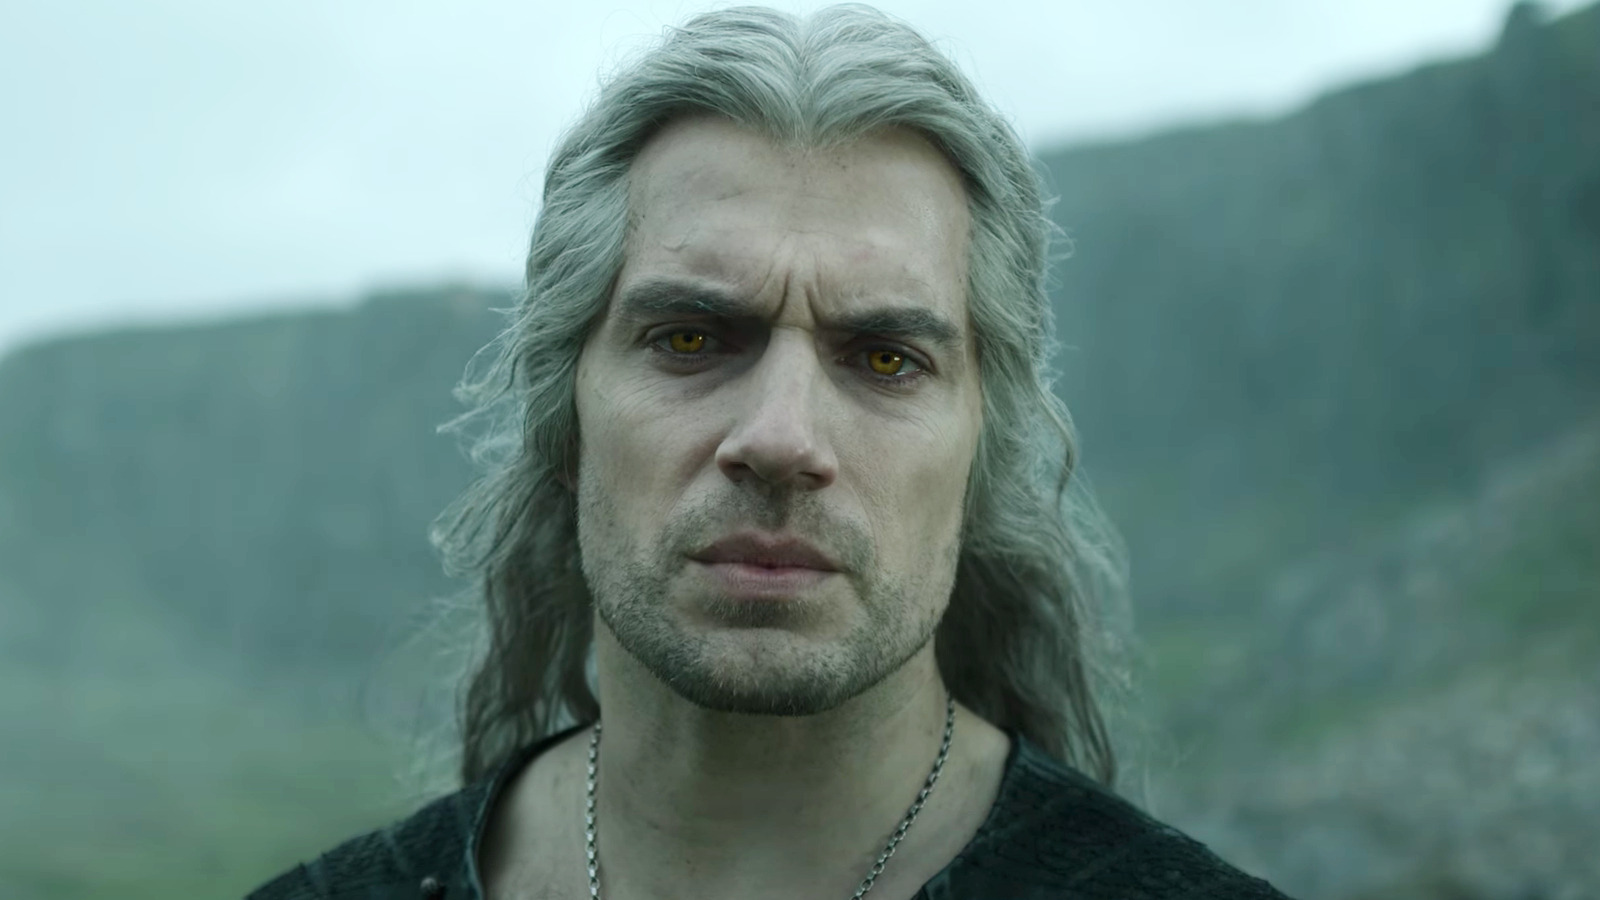 See Liam Hemsworth as Geralt in trailer for The Witcher season 4